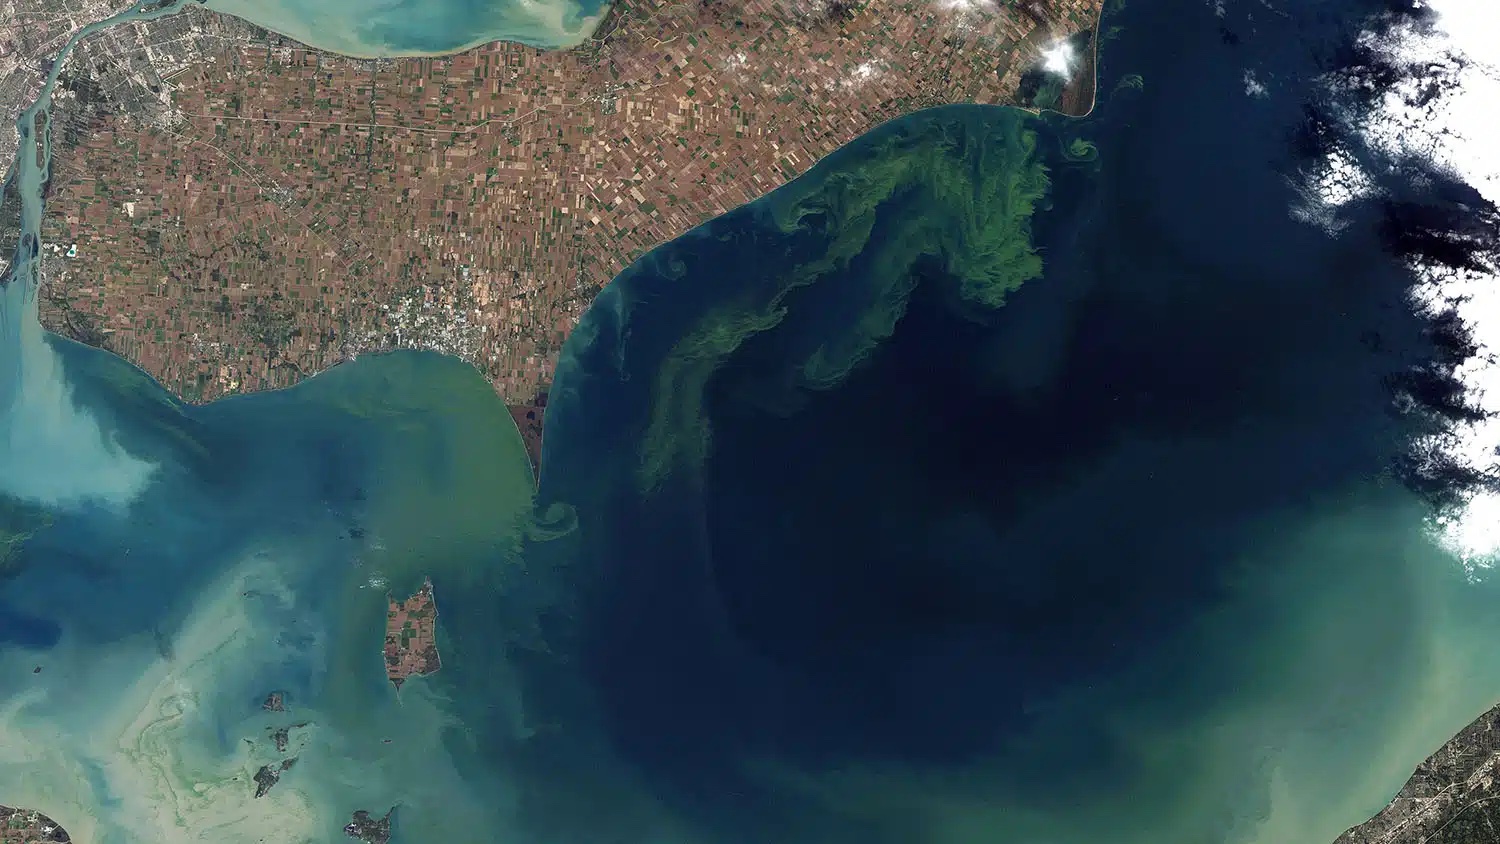 The green plumes in this satellite image of Lake Erie from 2011 are algal blooms extending from the northern shore. Image is from NASA Earth Observatory.